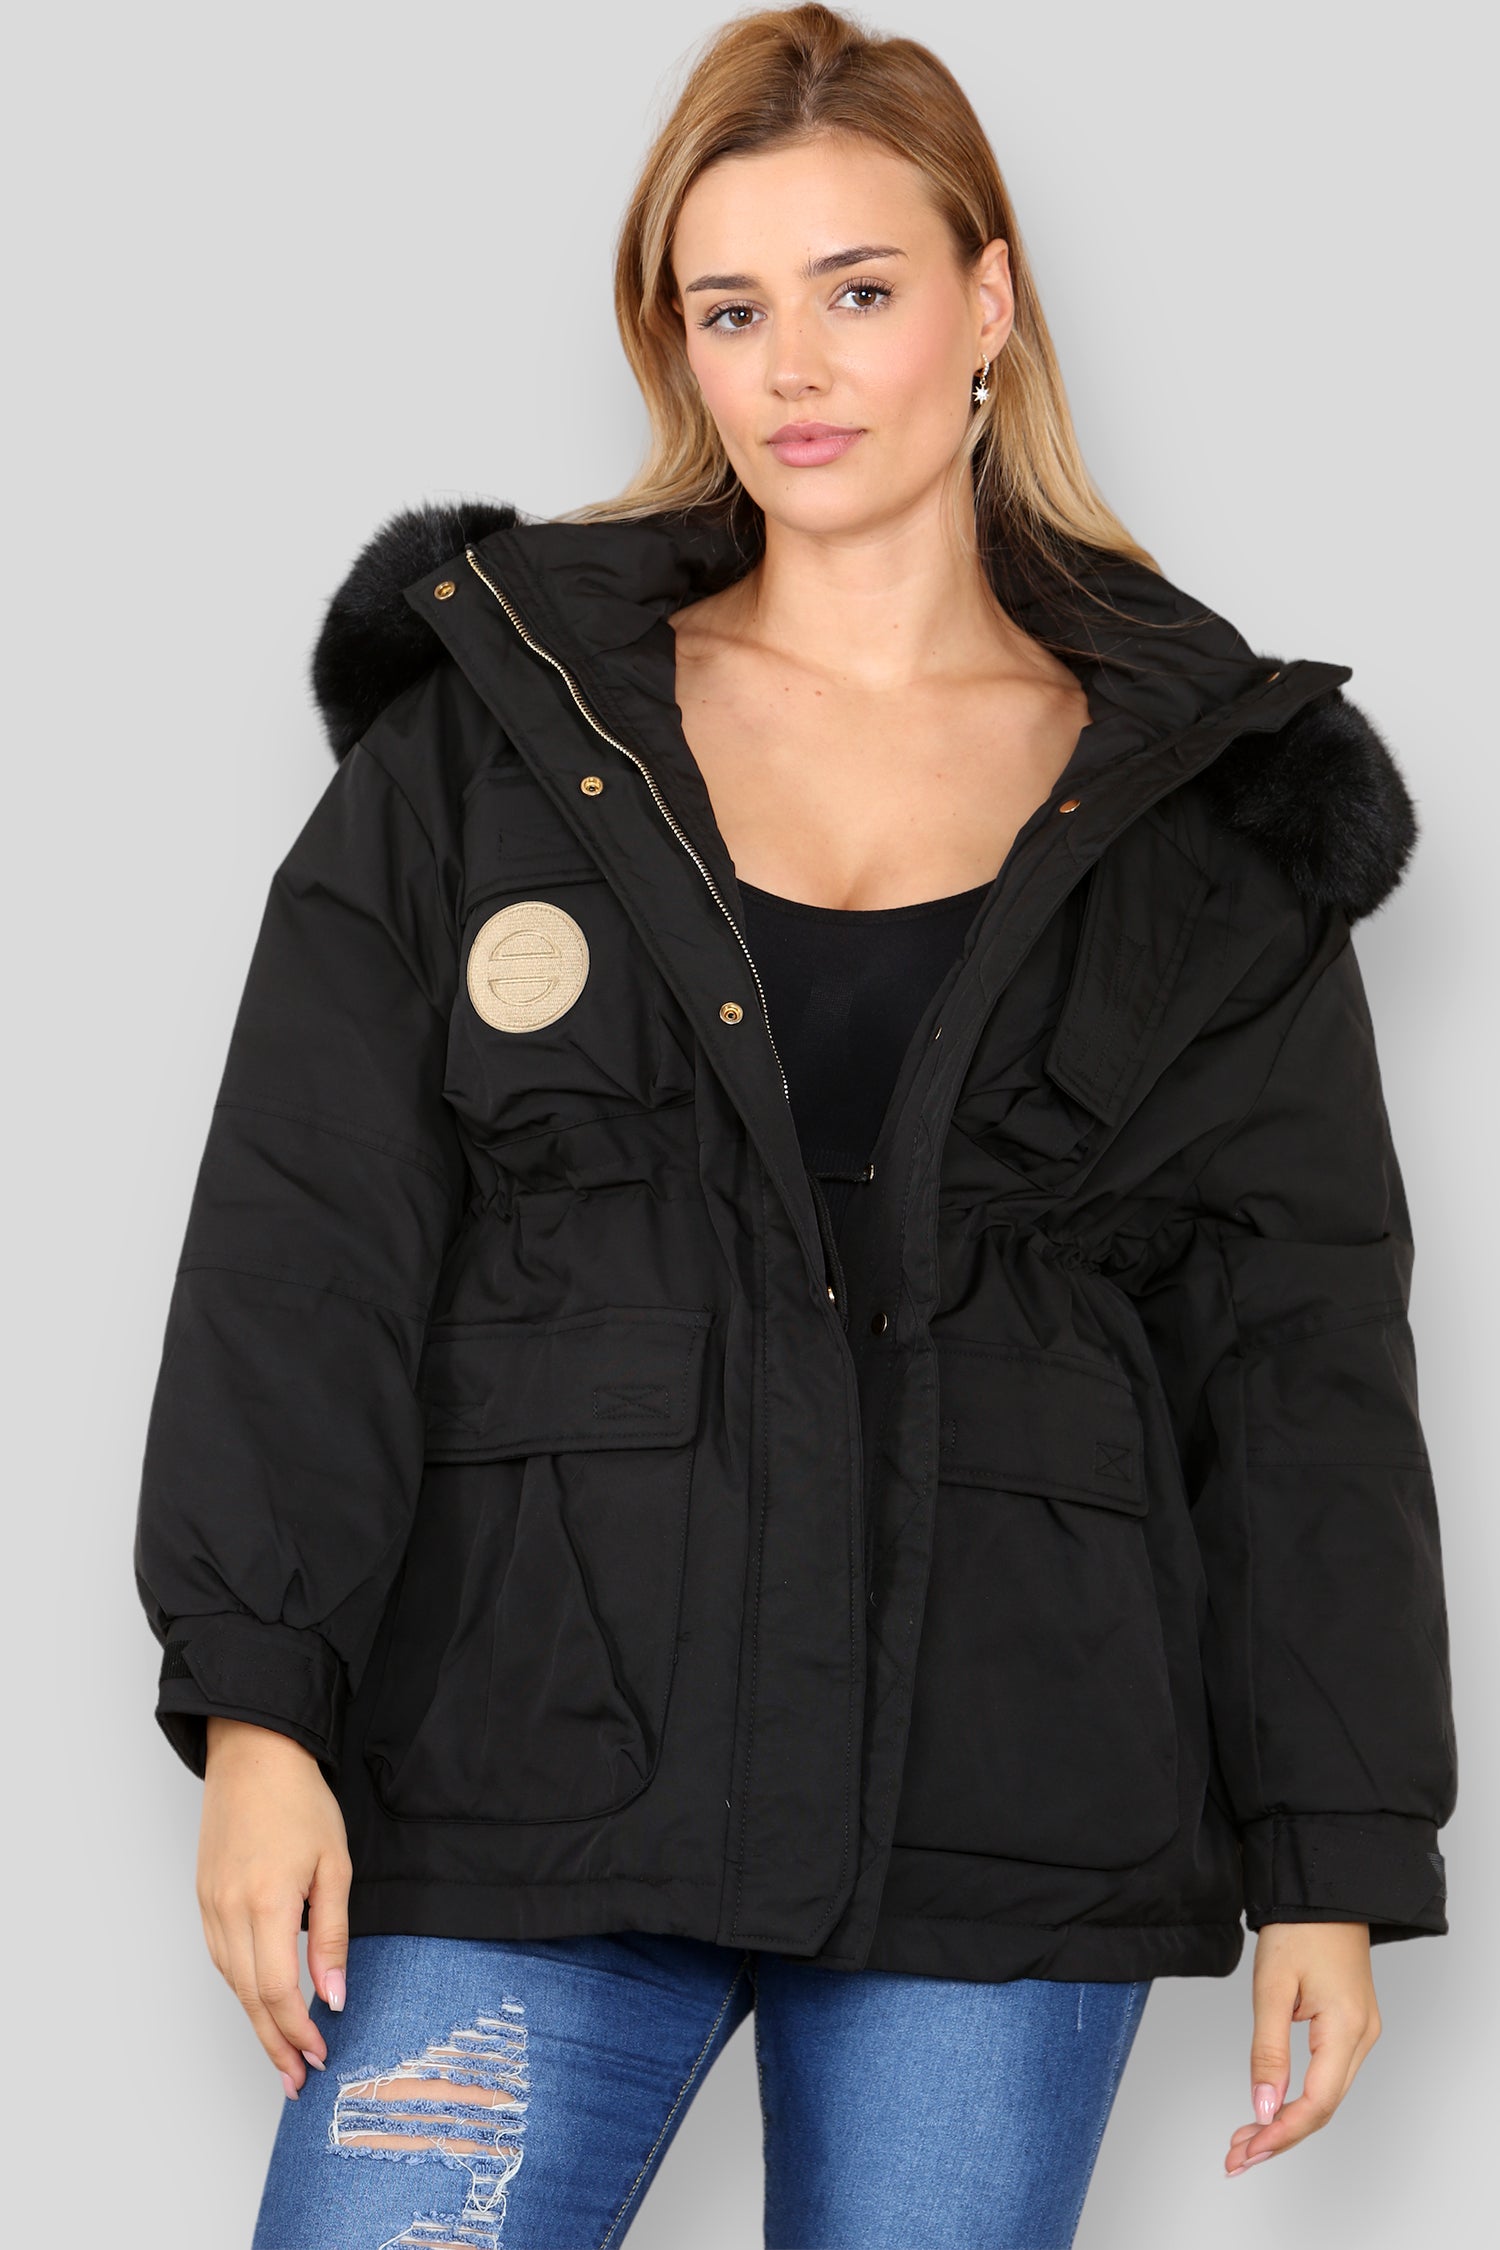 Love Sunshine Round Badge Hooded Black Puffer Jacket with Pockets LS-23MA